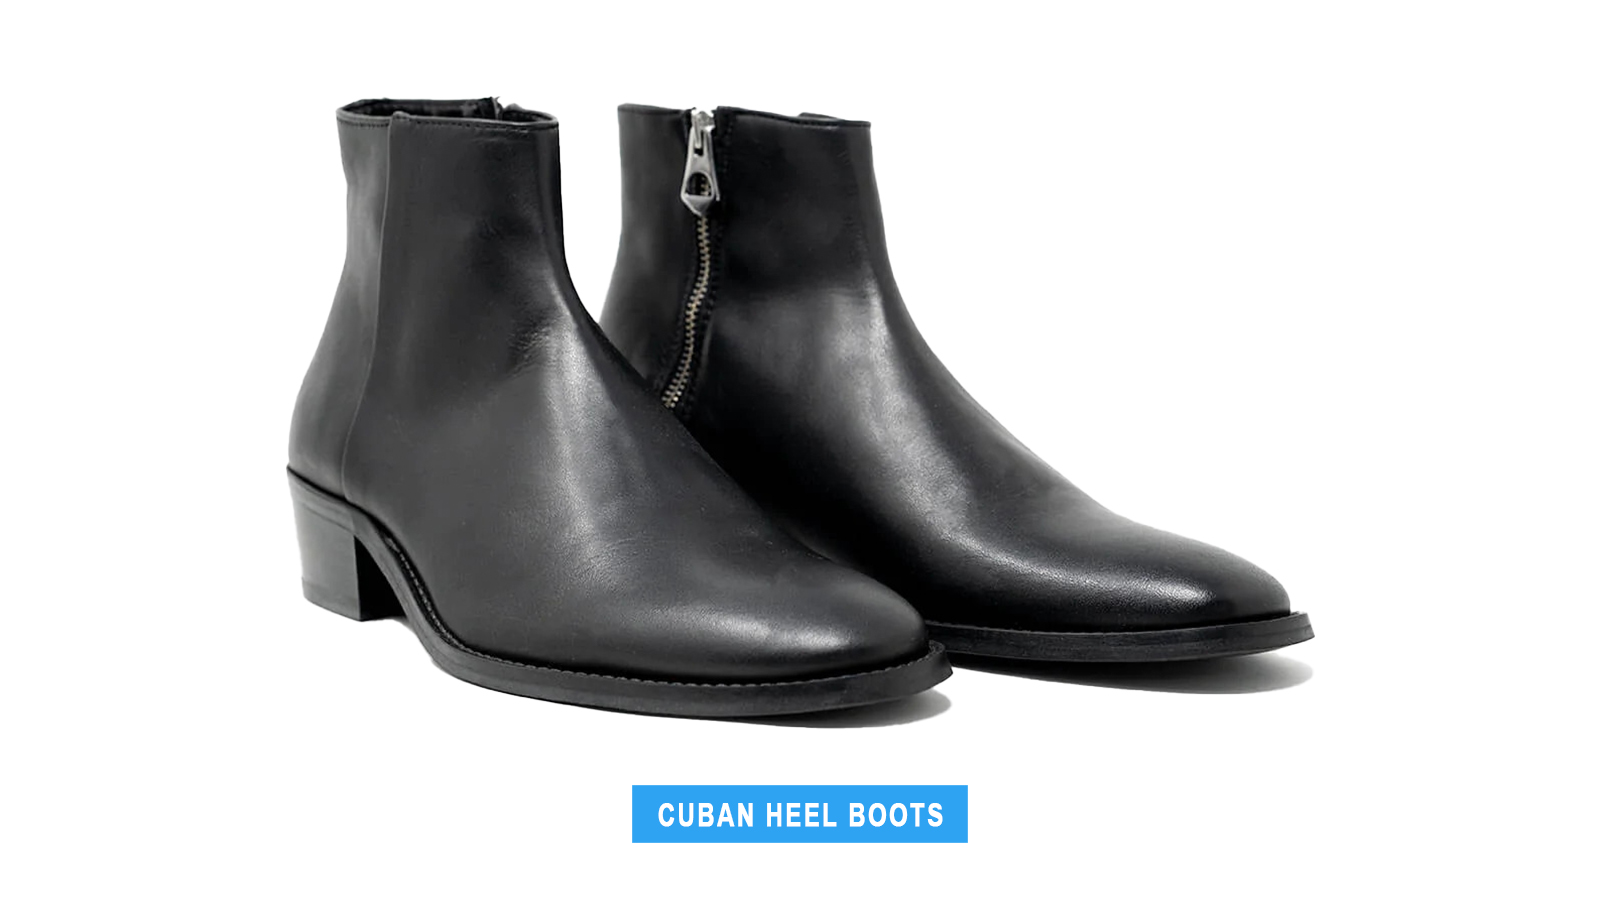 Cuban heel boots style for men